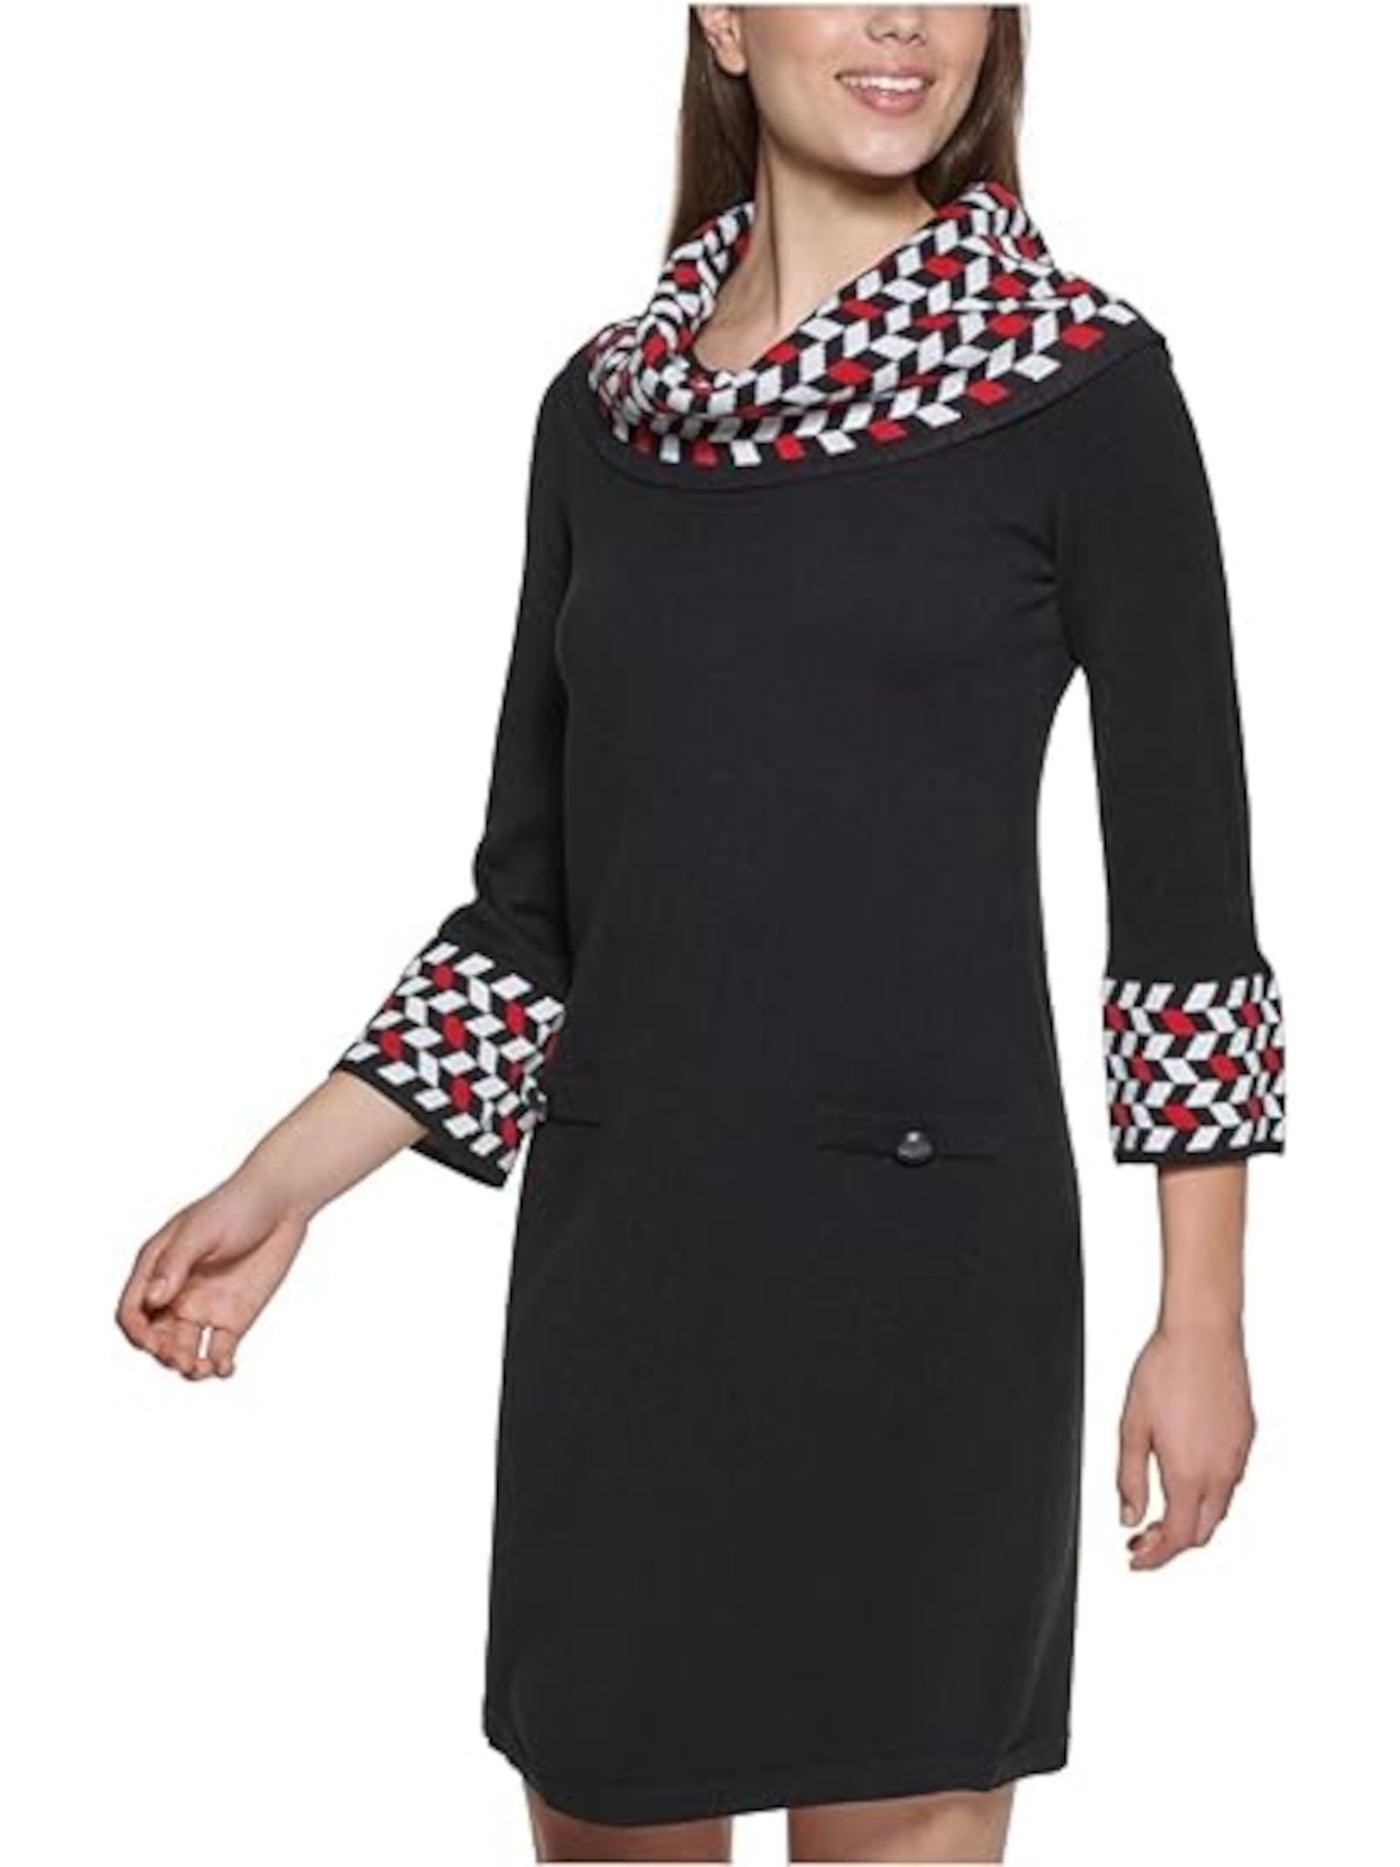 JESSICA HOWARD Womens Black Knit Unlined Faux Pockets Geometric 3/4 Sleeve Cowl Neck Above The Knee Wear To Work Sweater Dress Petites PL